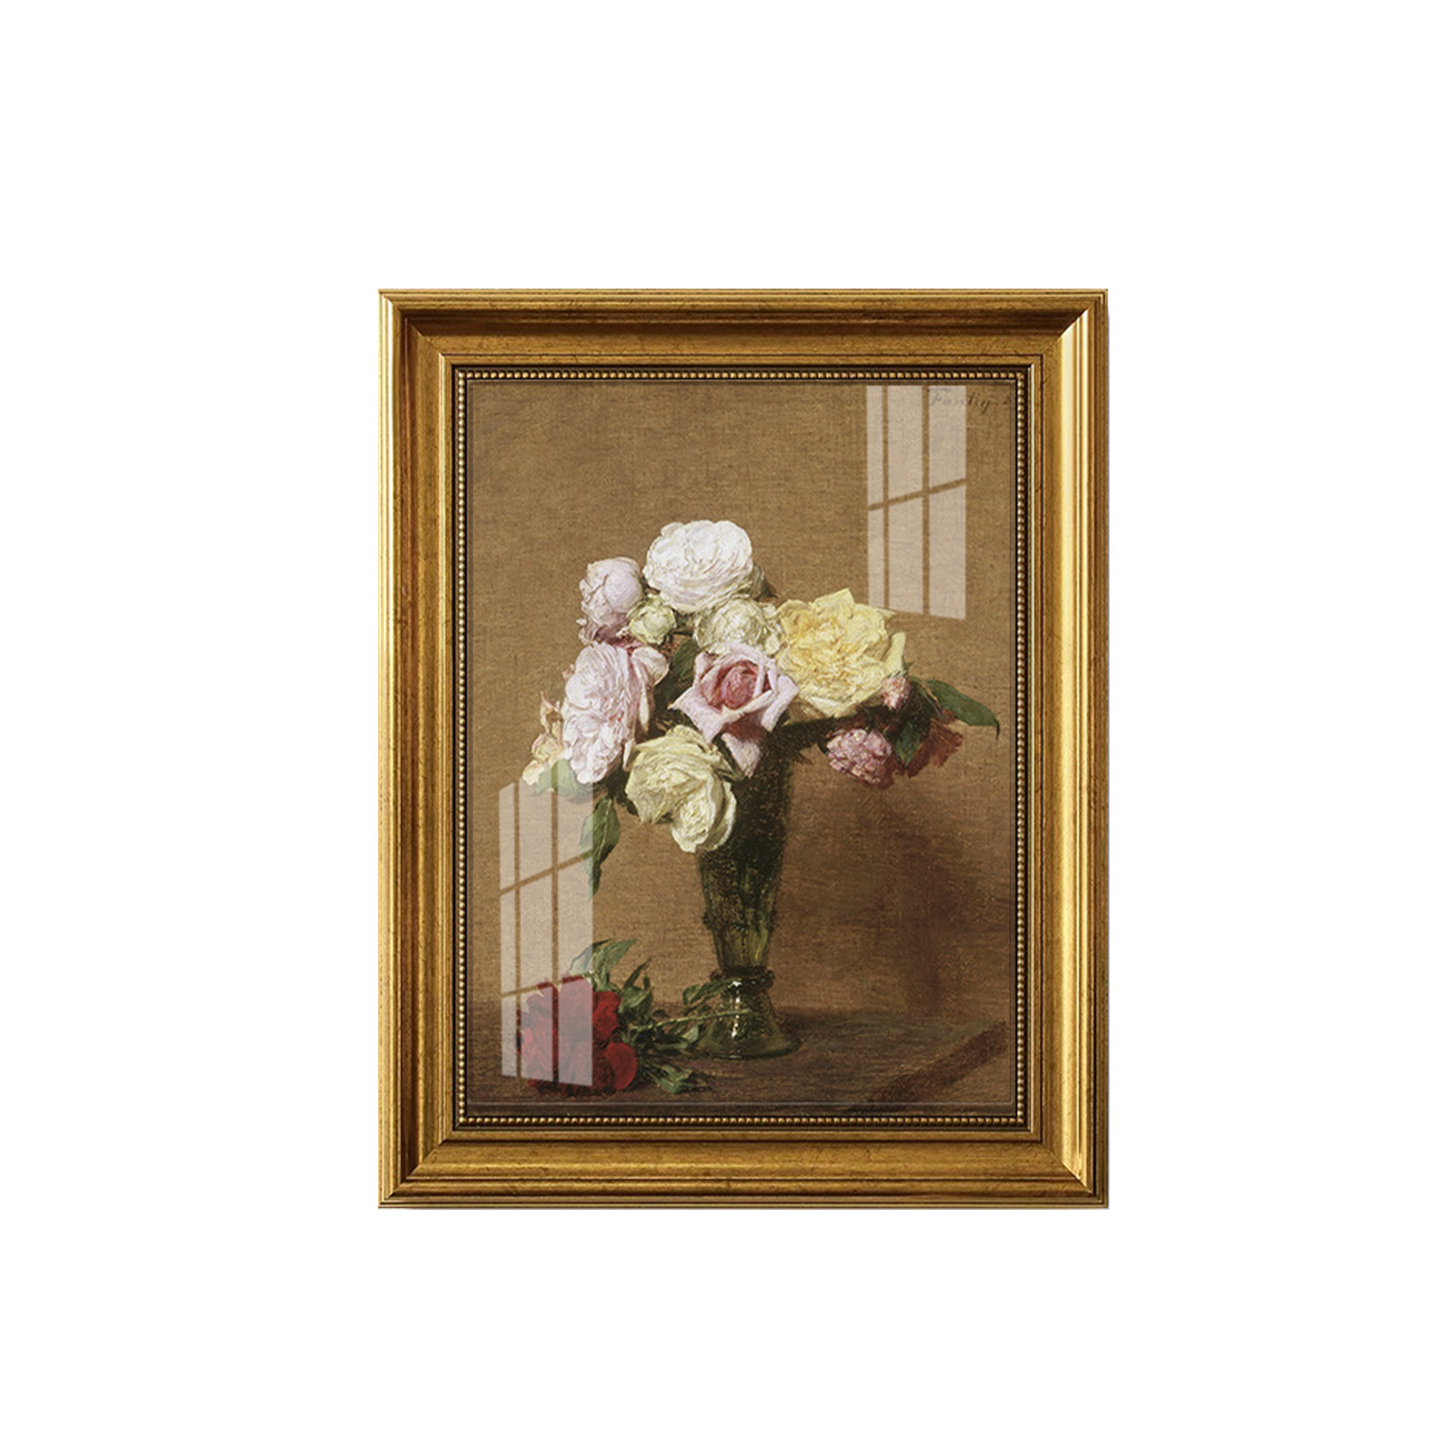 Antique "Still Life with Roses in a Fluted Vase" Painting